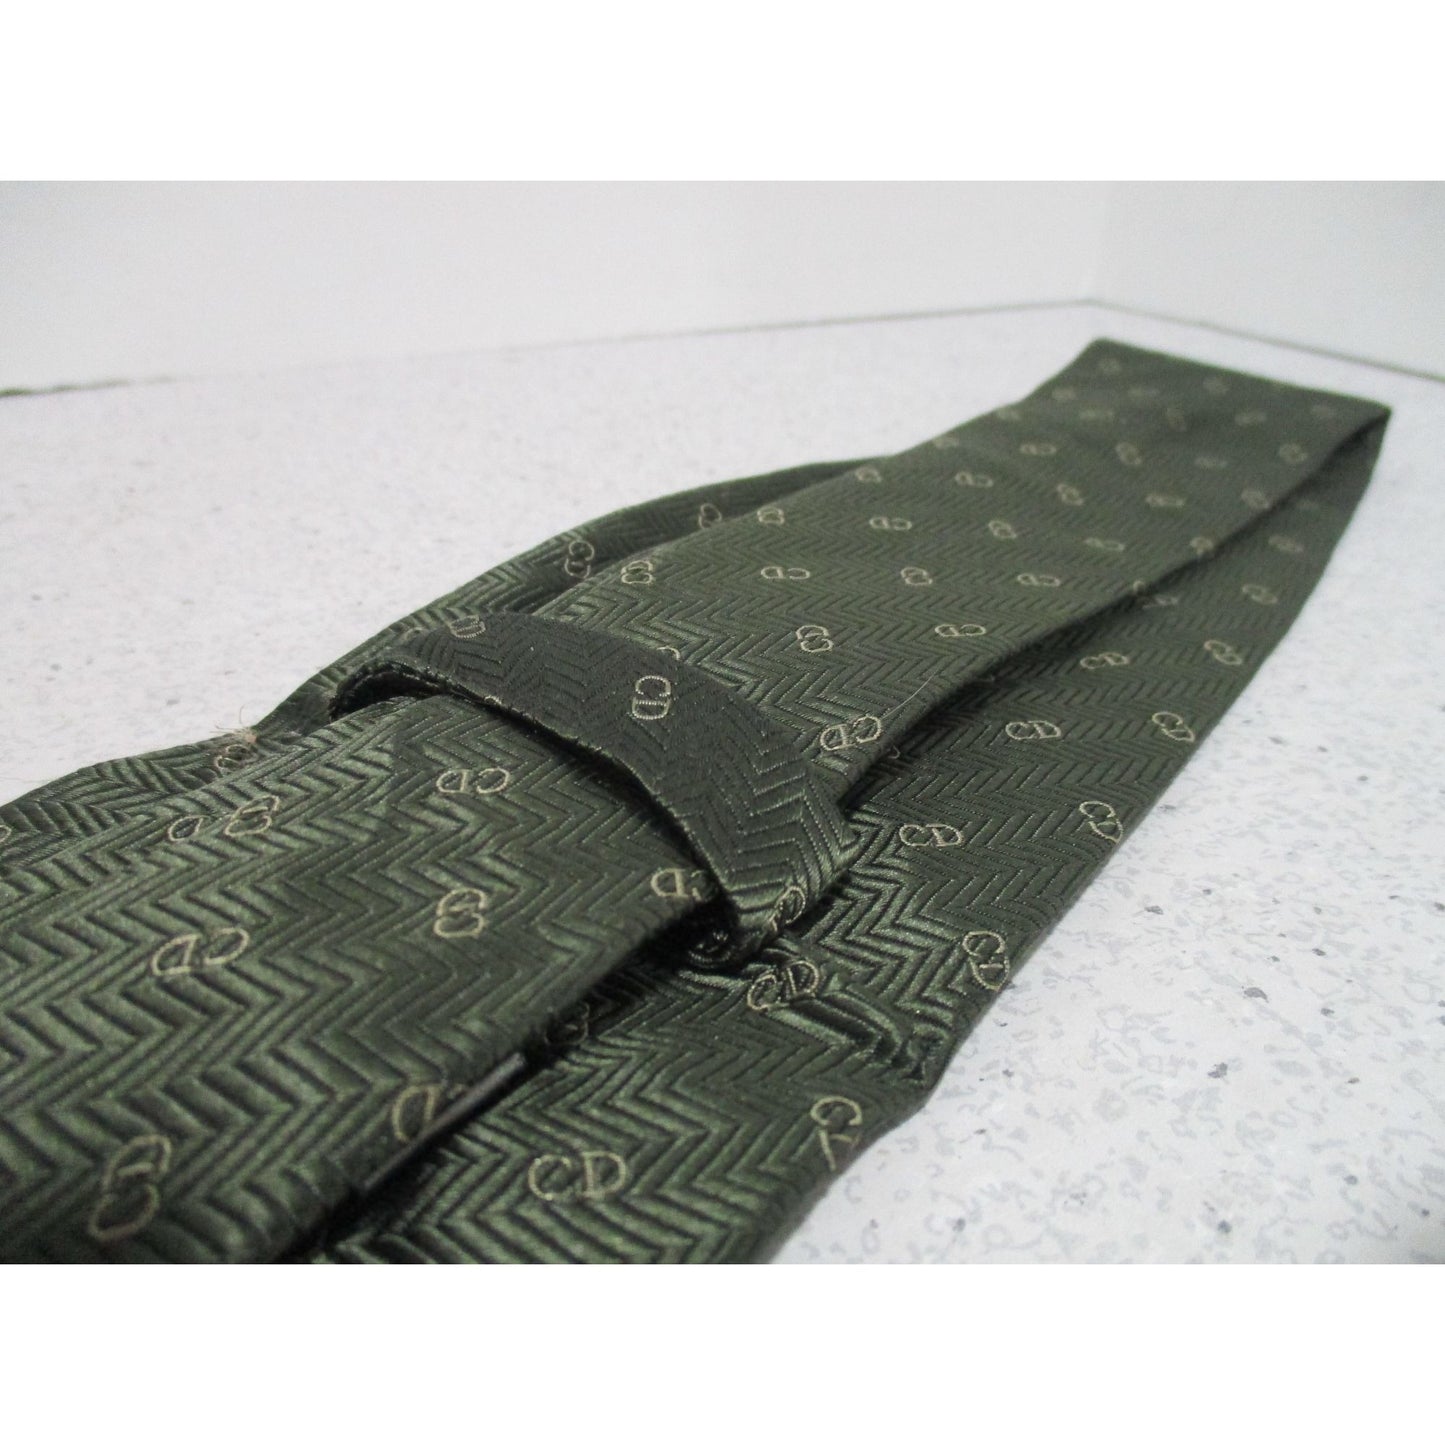 Vintage Christian Dior tie made of 100% textured, olive green silk with a logo print in shades of tan